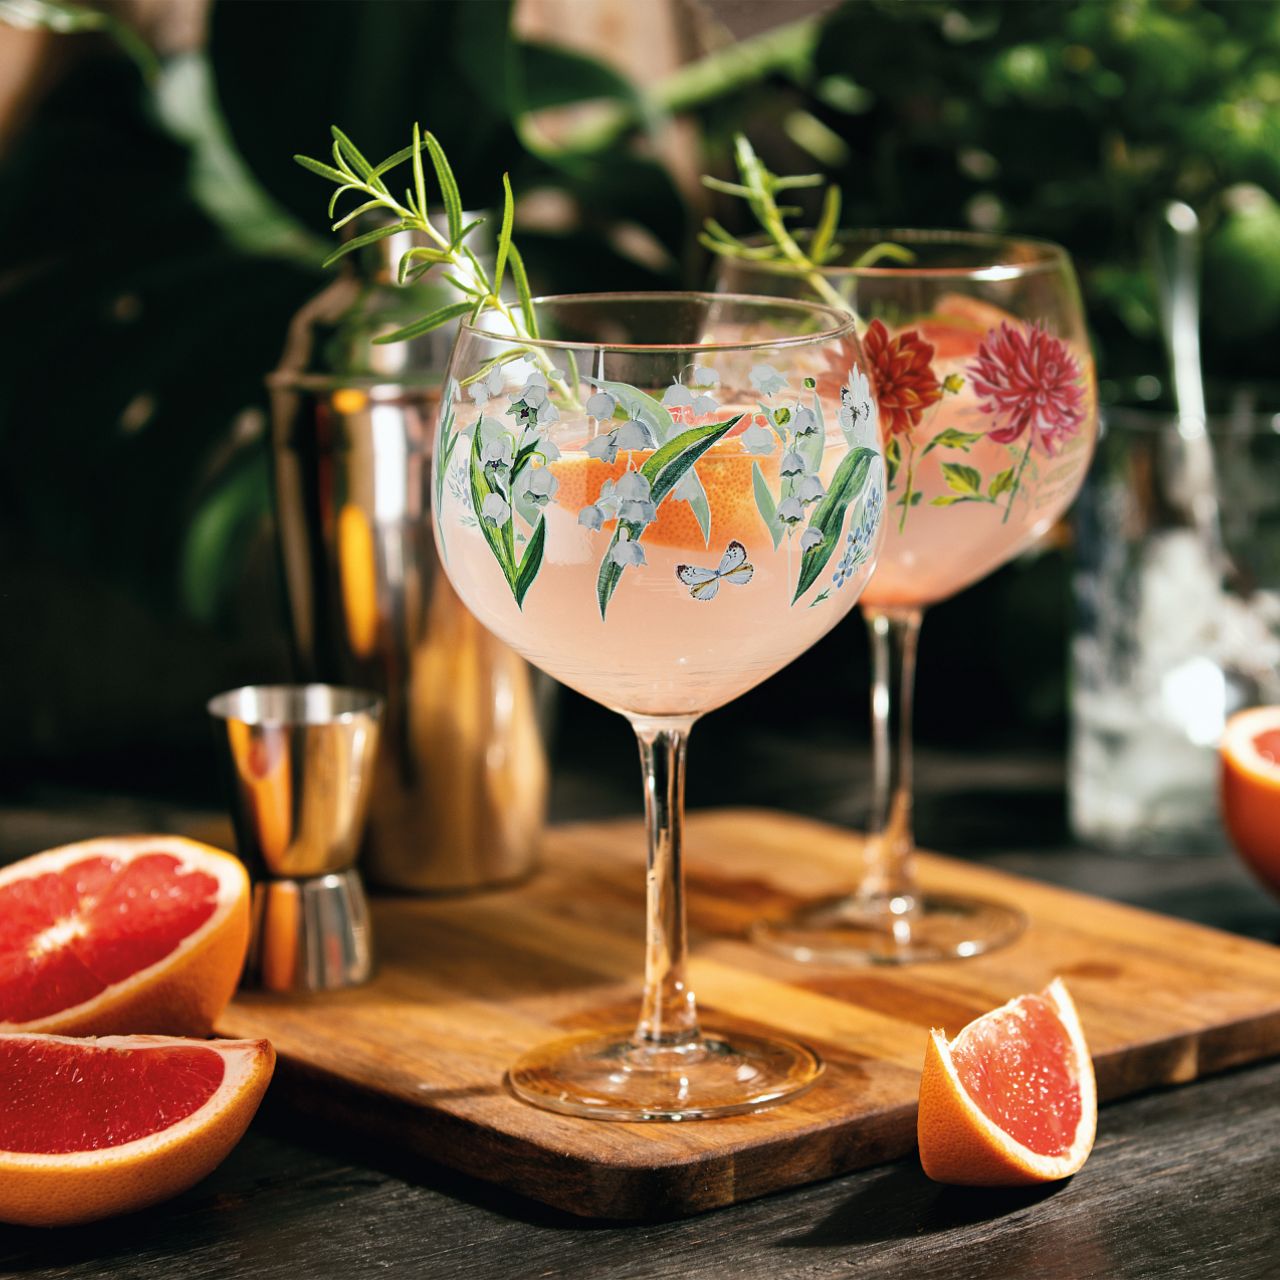 Ginology Dahlia Copa Gin Glass  The Dahlia is the perfect flower to express your love and there is no better way to show it than pairing our Dahlia Copa Gin glass with their favourite bottle of drink. Beautiful reds, pinks and yellows surrounded with green eucalyptus. 